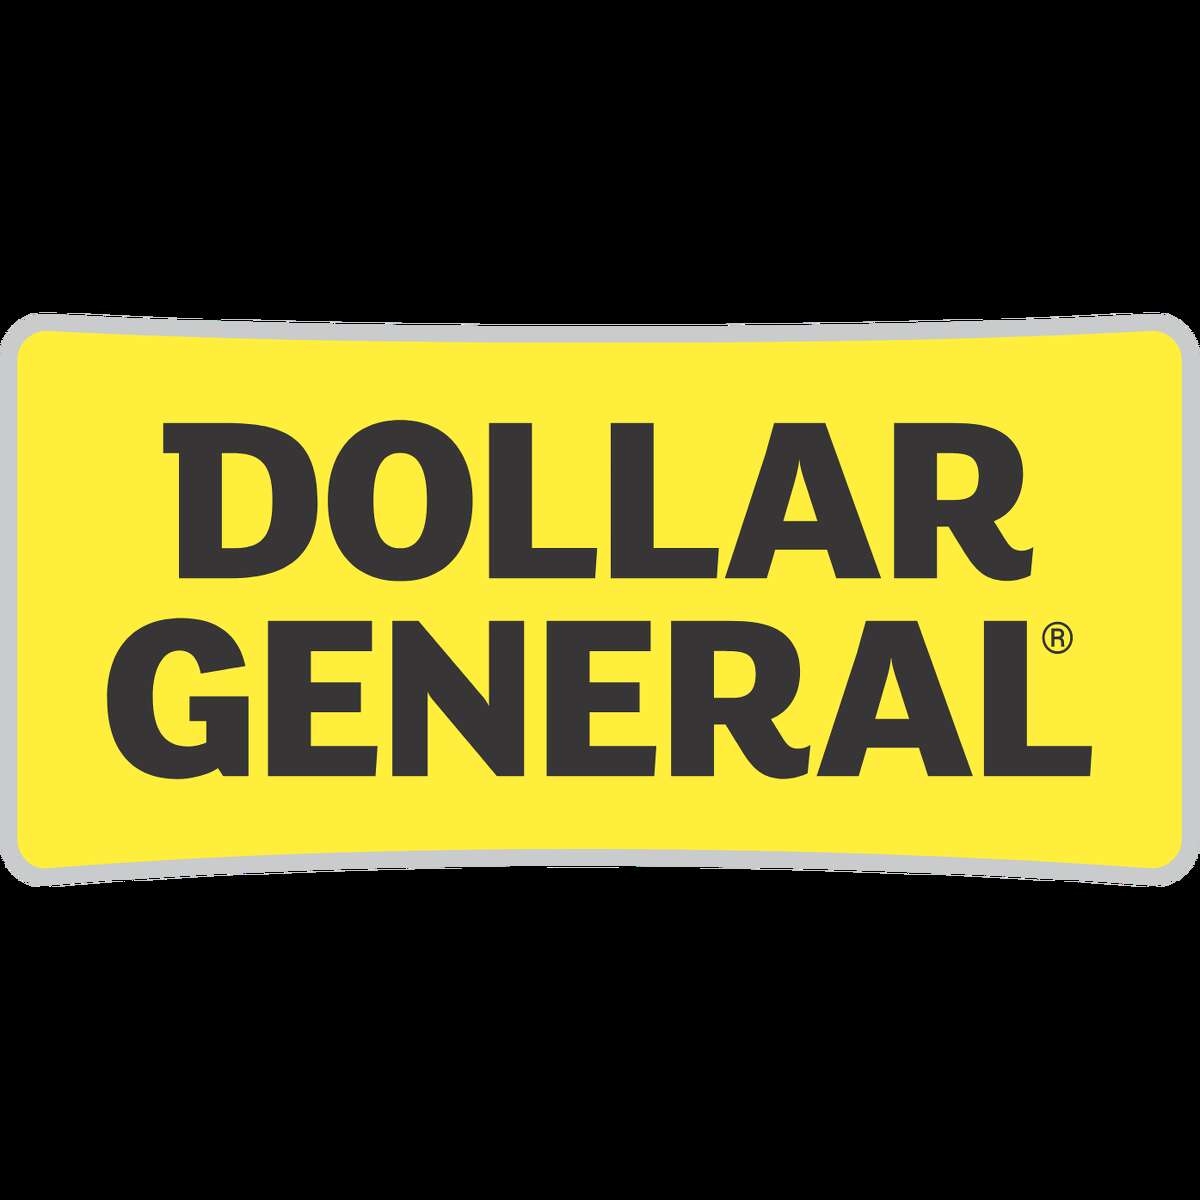 Dollar General has opened a new store located at 17169 Pleasanton Hwy. in Manistee County.